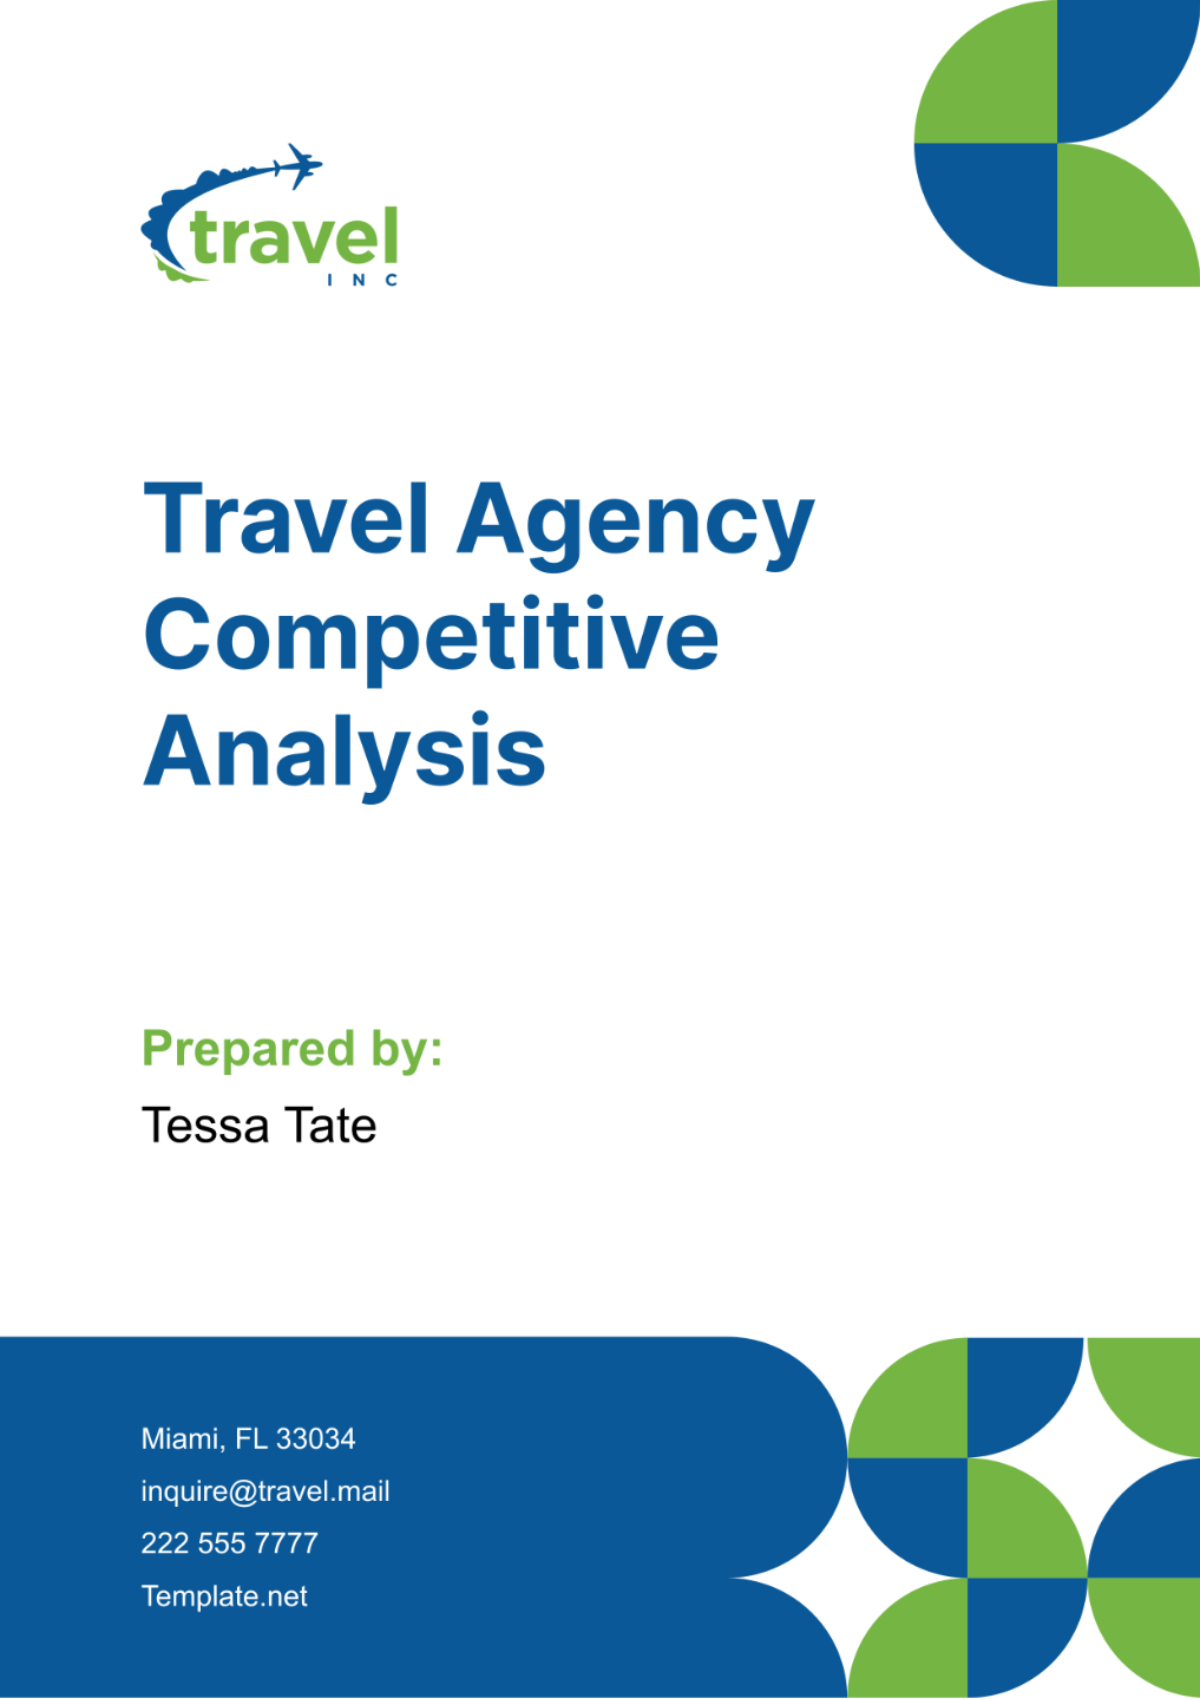 Travel Agency Competitive Analysis Template